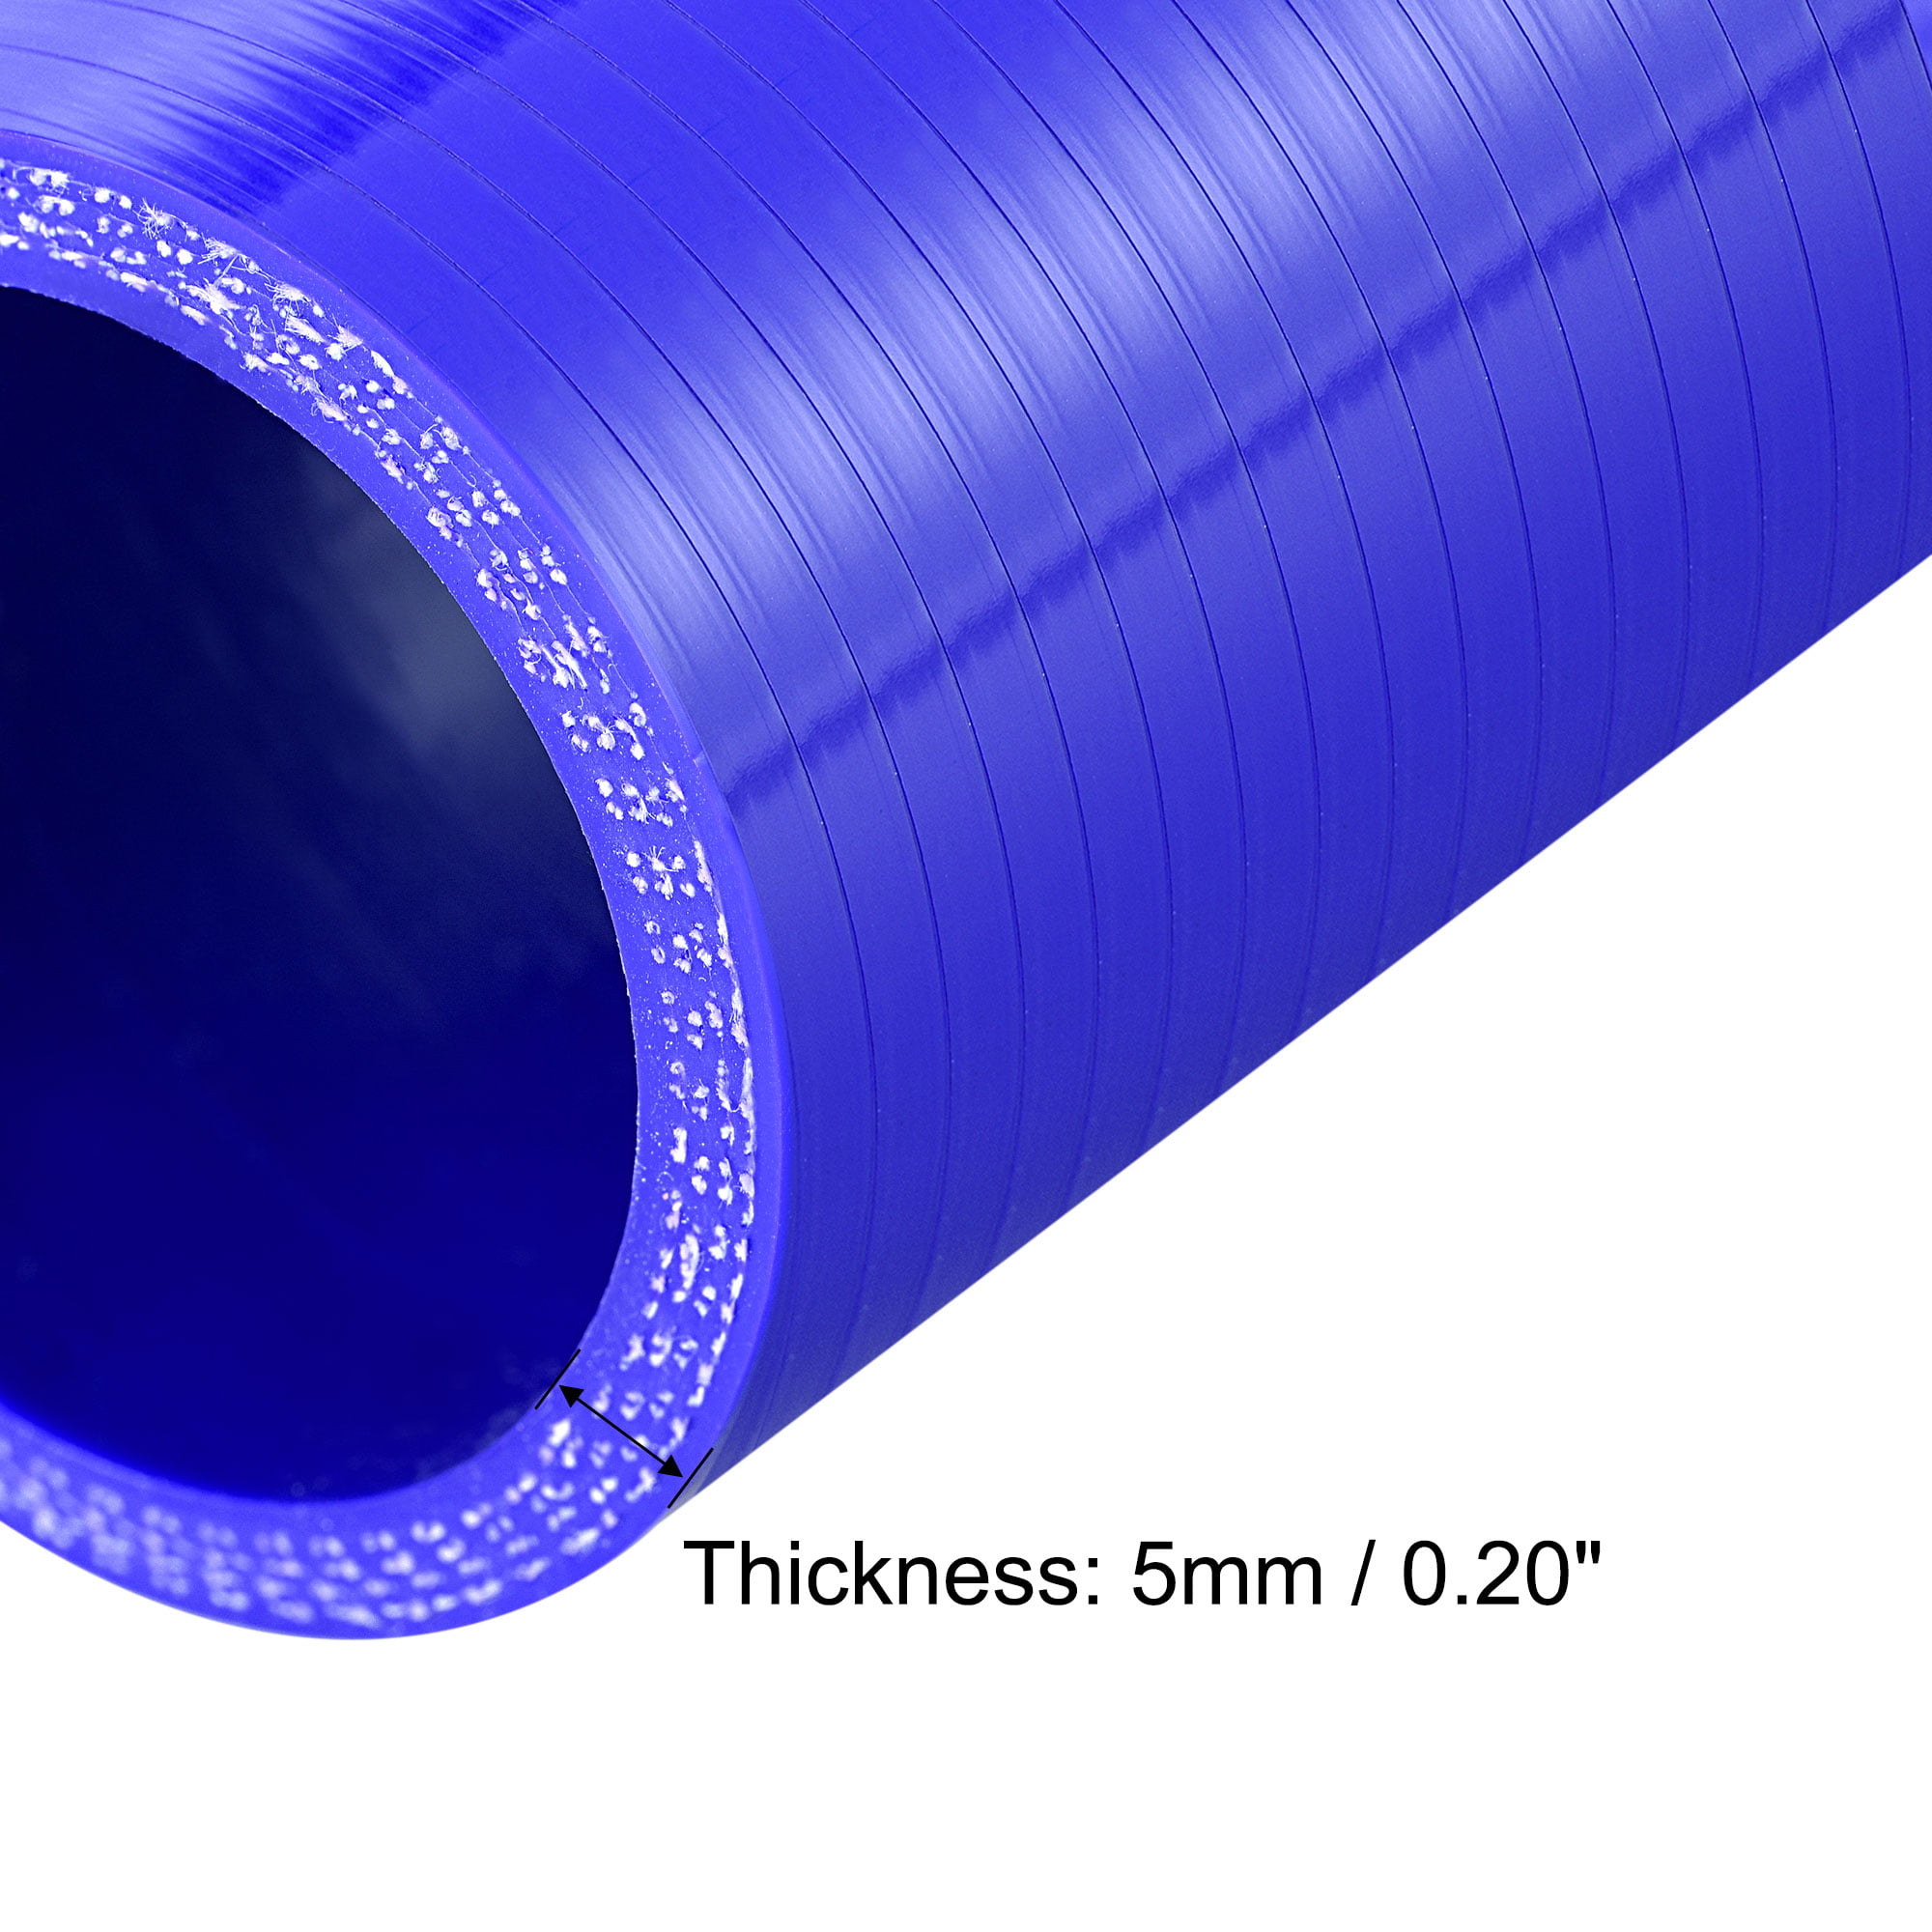 35 MM 1.38" INCH SILICONE HOSE/1 METRE 4 PLY STRAIGHT SILICONE COUPLER HOSE BLUE 